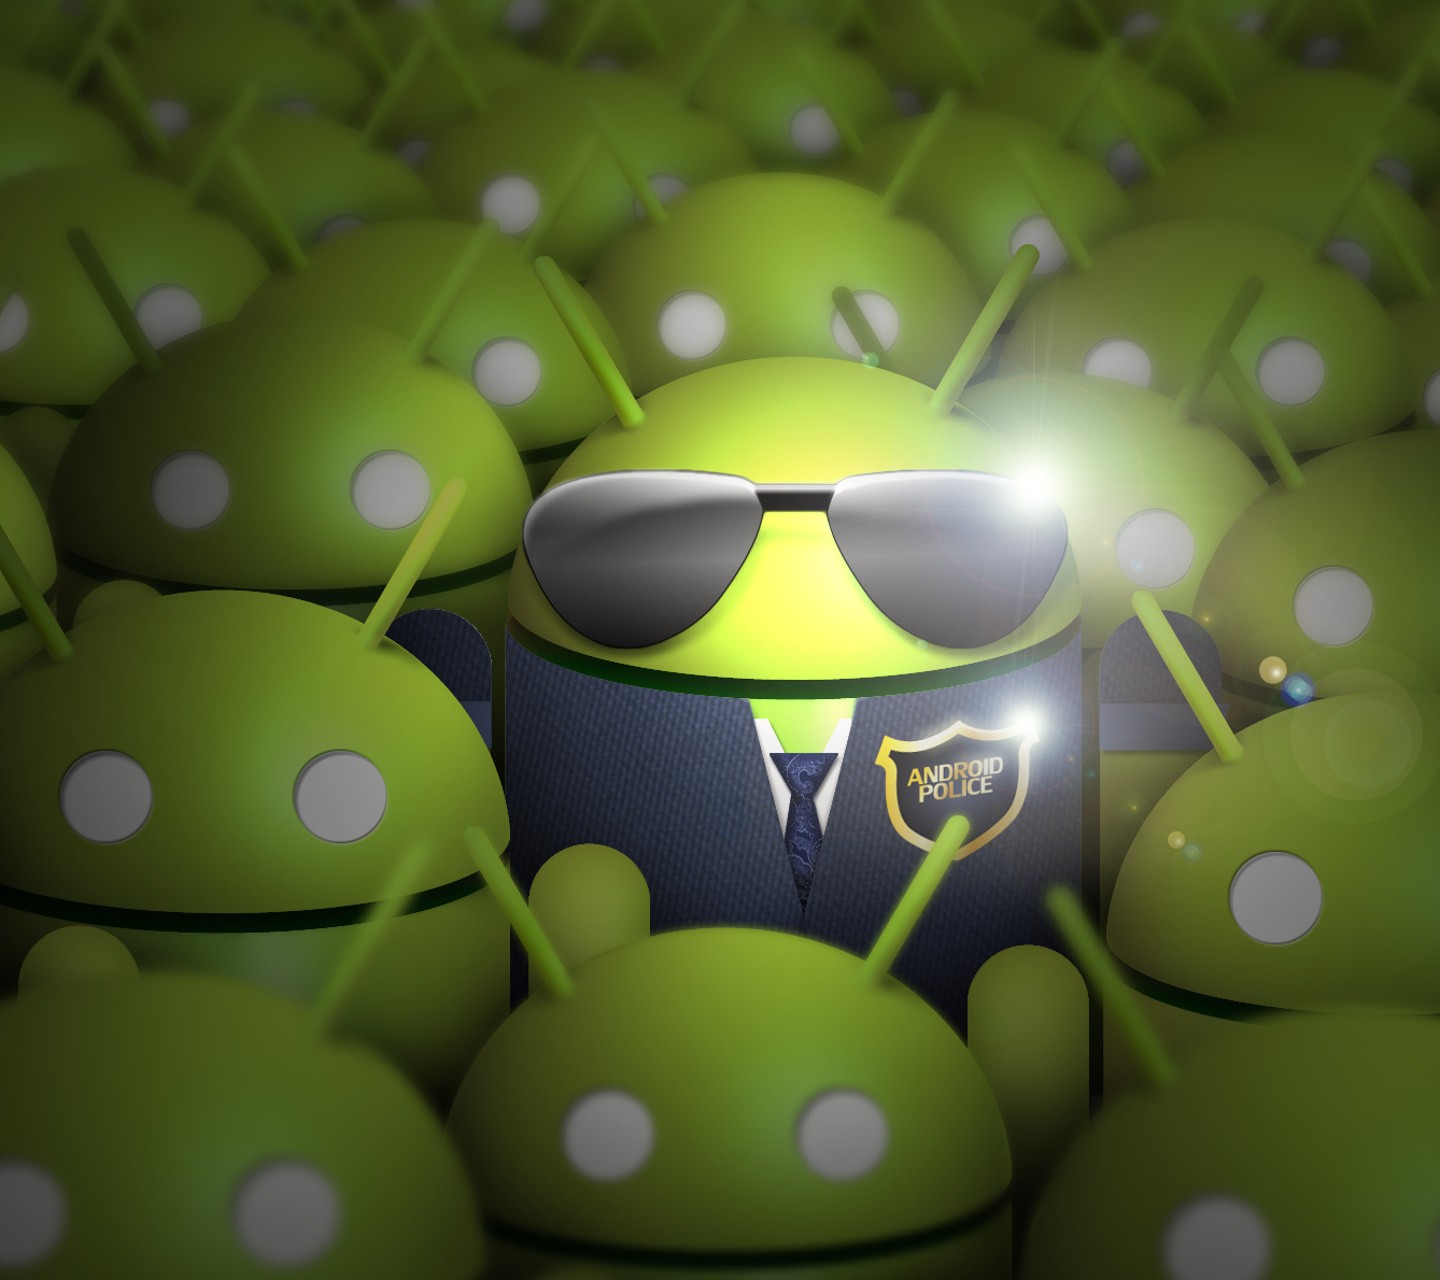 Android (operating System) Wallpaper